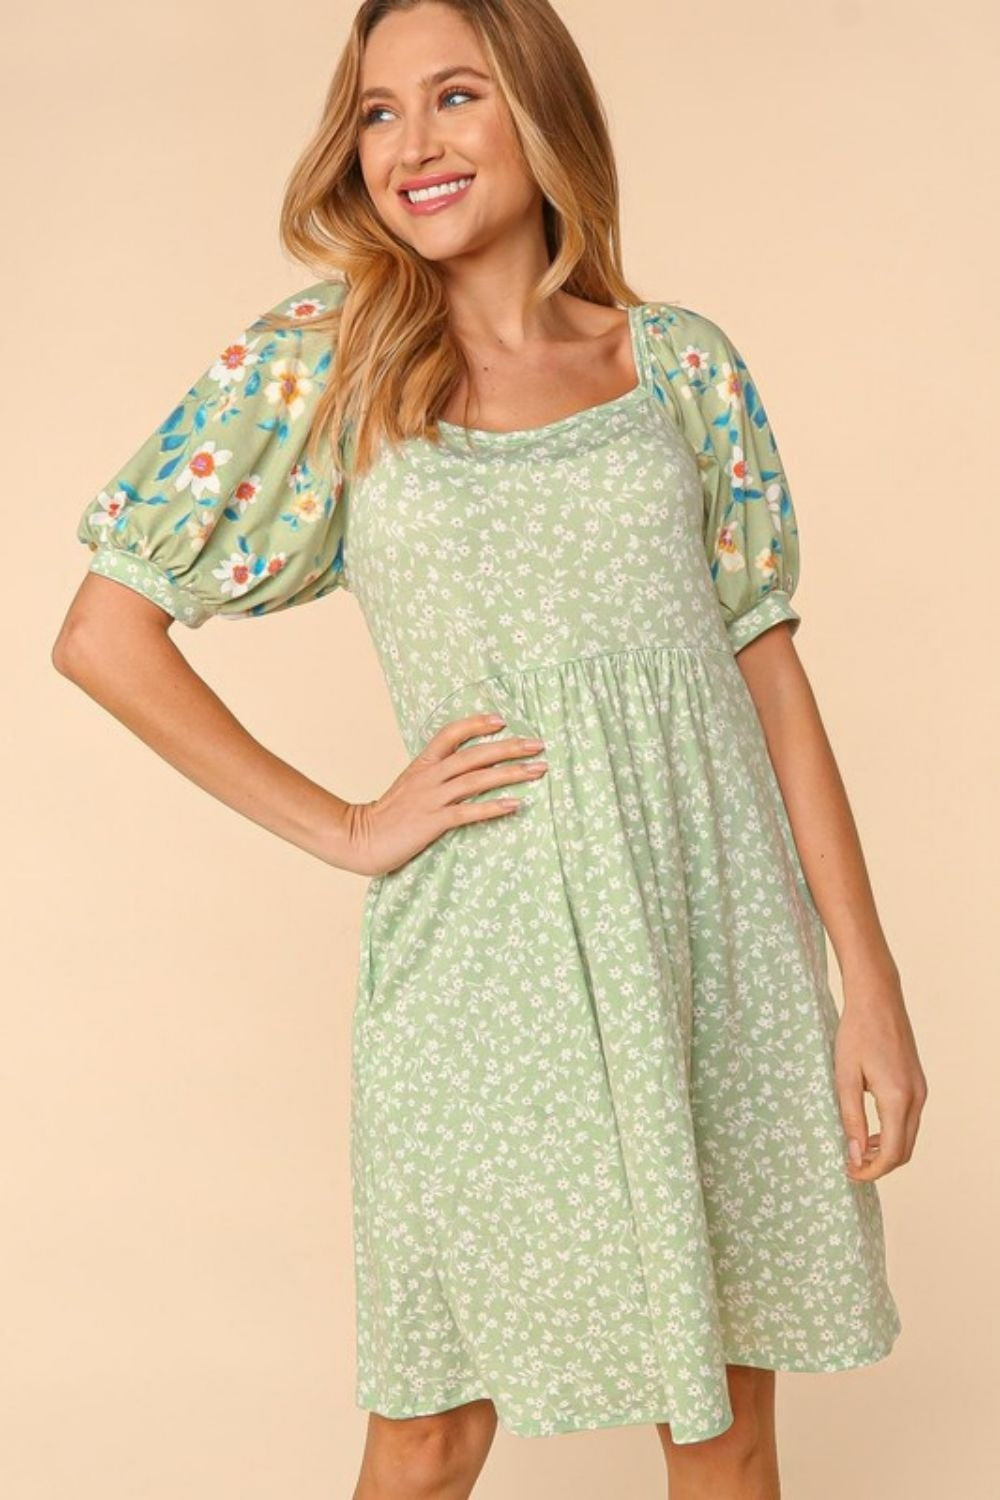 Floral Lantern Sleeve Dress with Pockets - Mulberry Skies